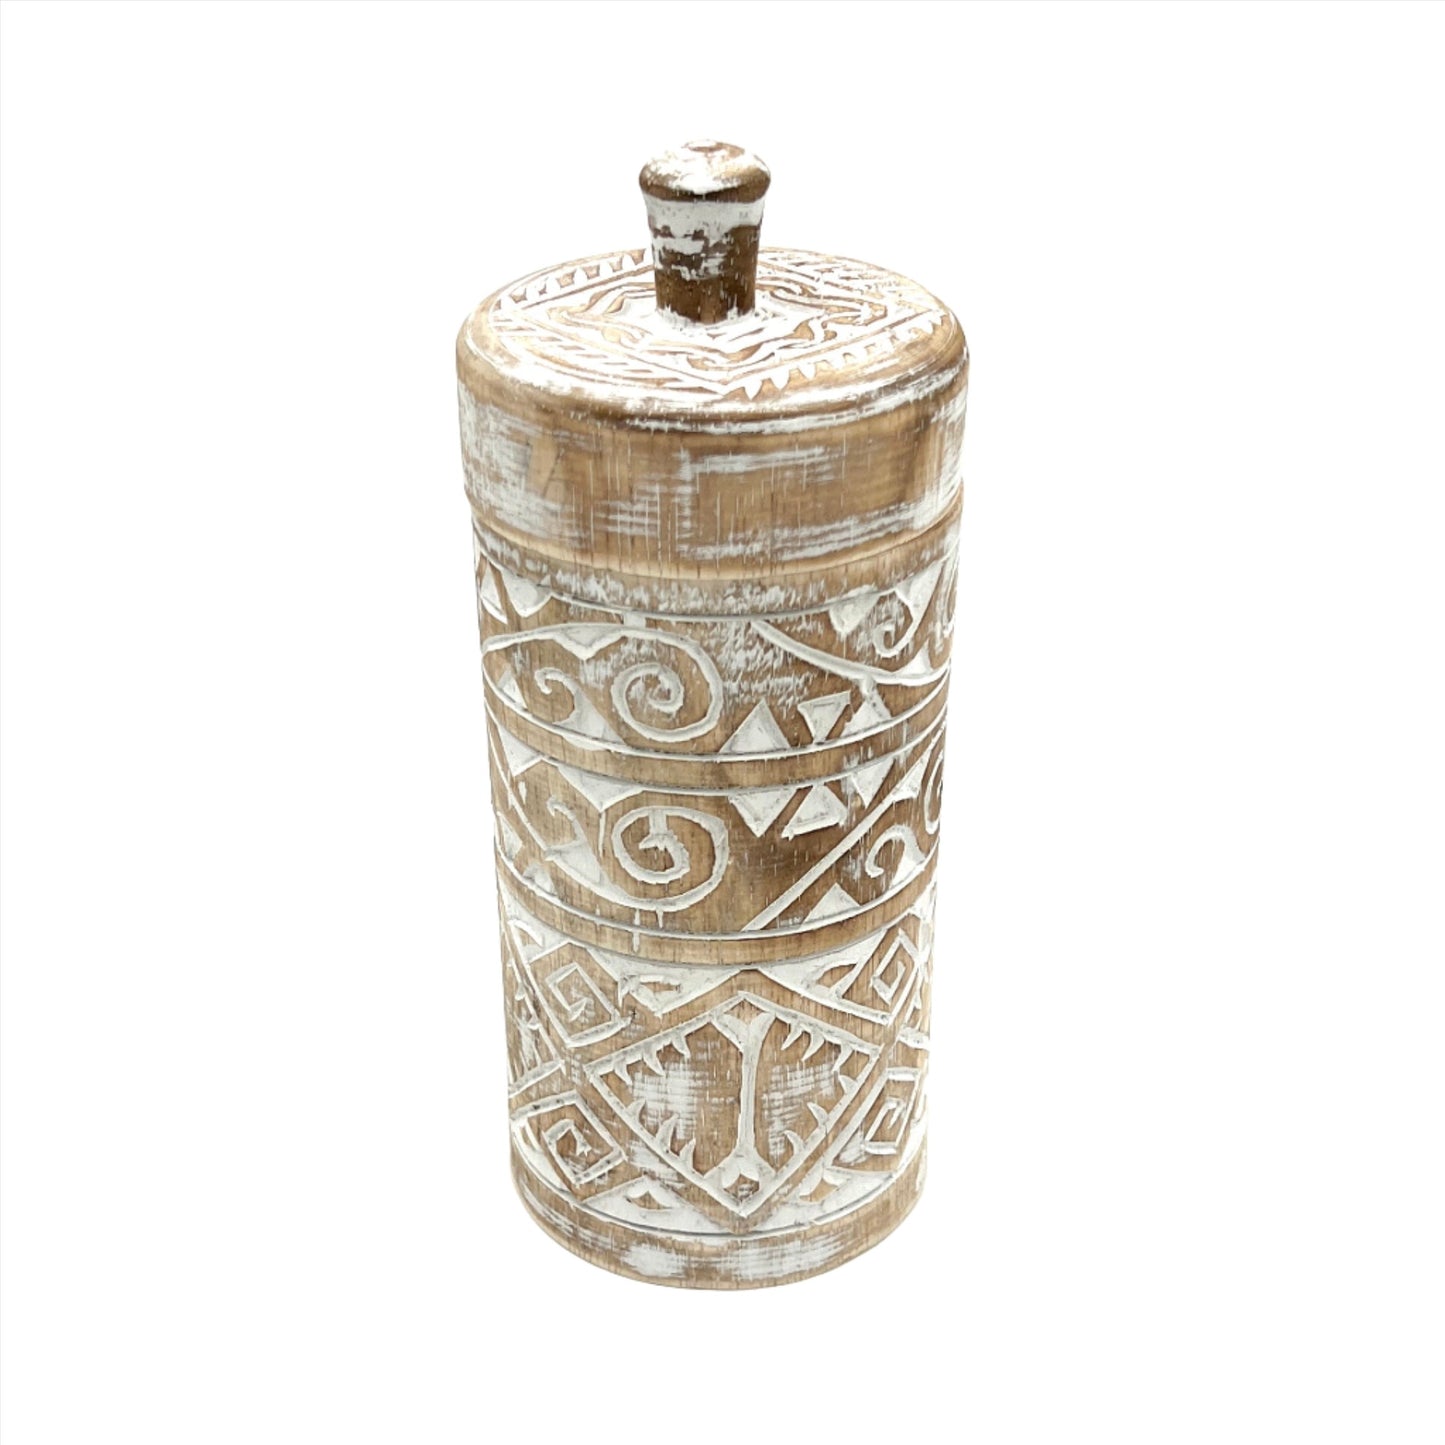 Carved Decor Container